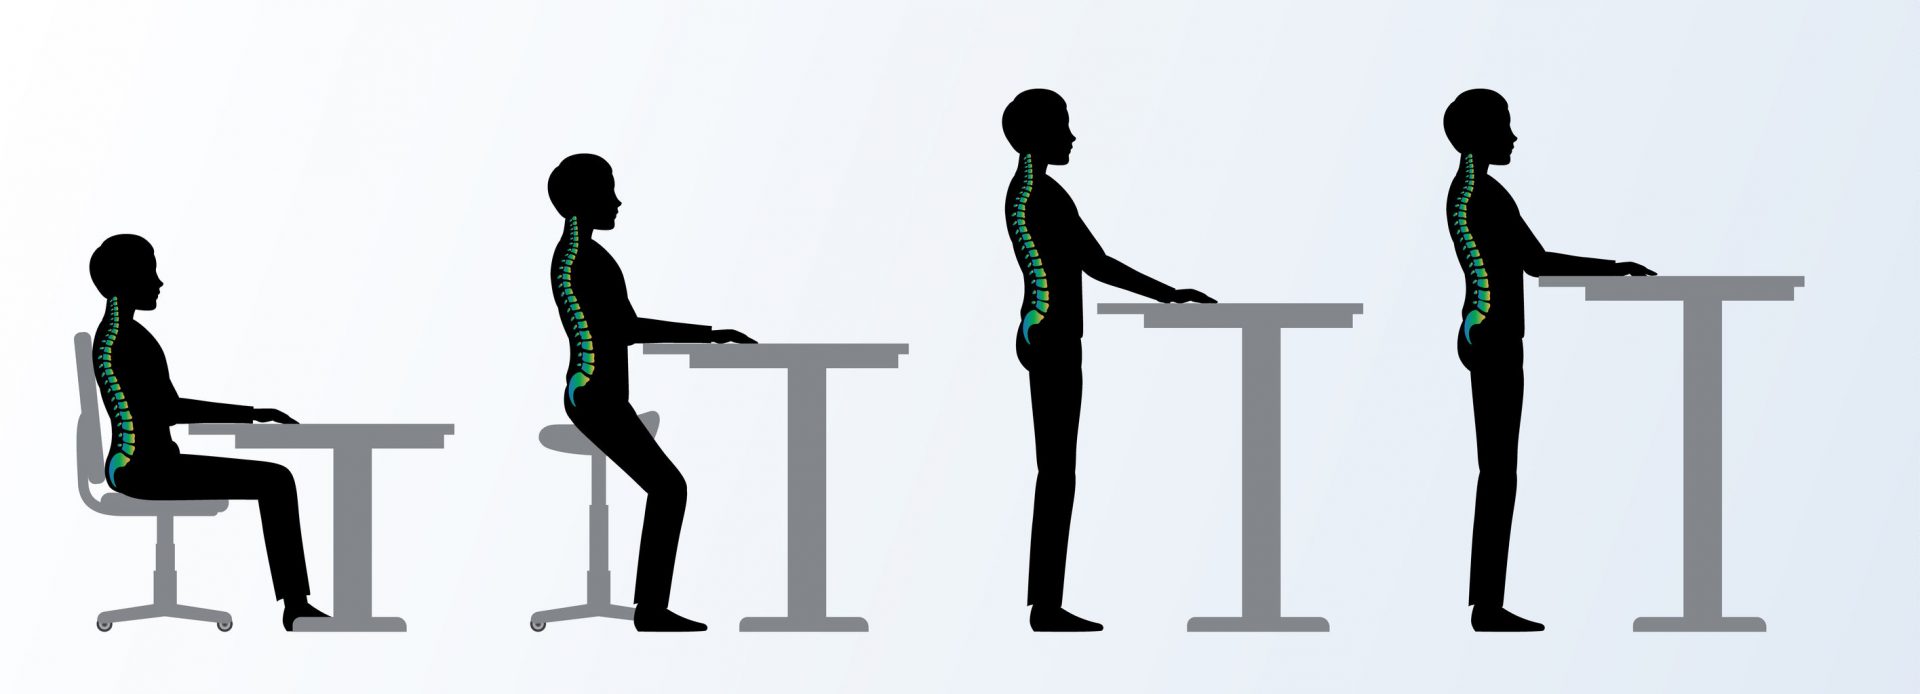 Ergonomically Correct Posture for Every Type of Desk Setup - Ergonomically Correct Posture for Sitting Desk and Standing Desk